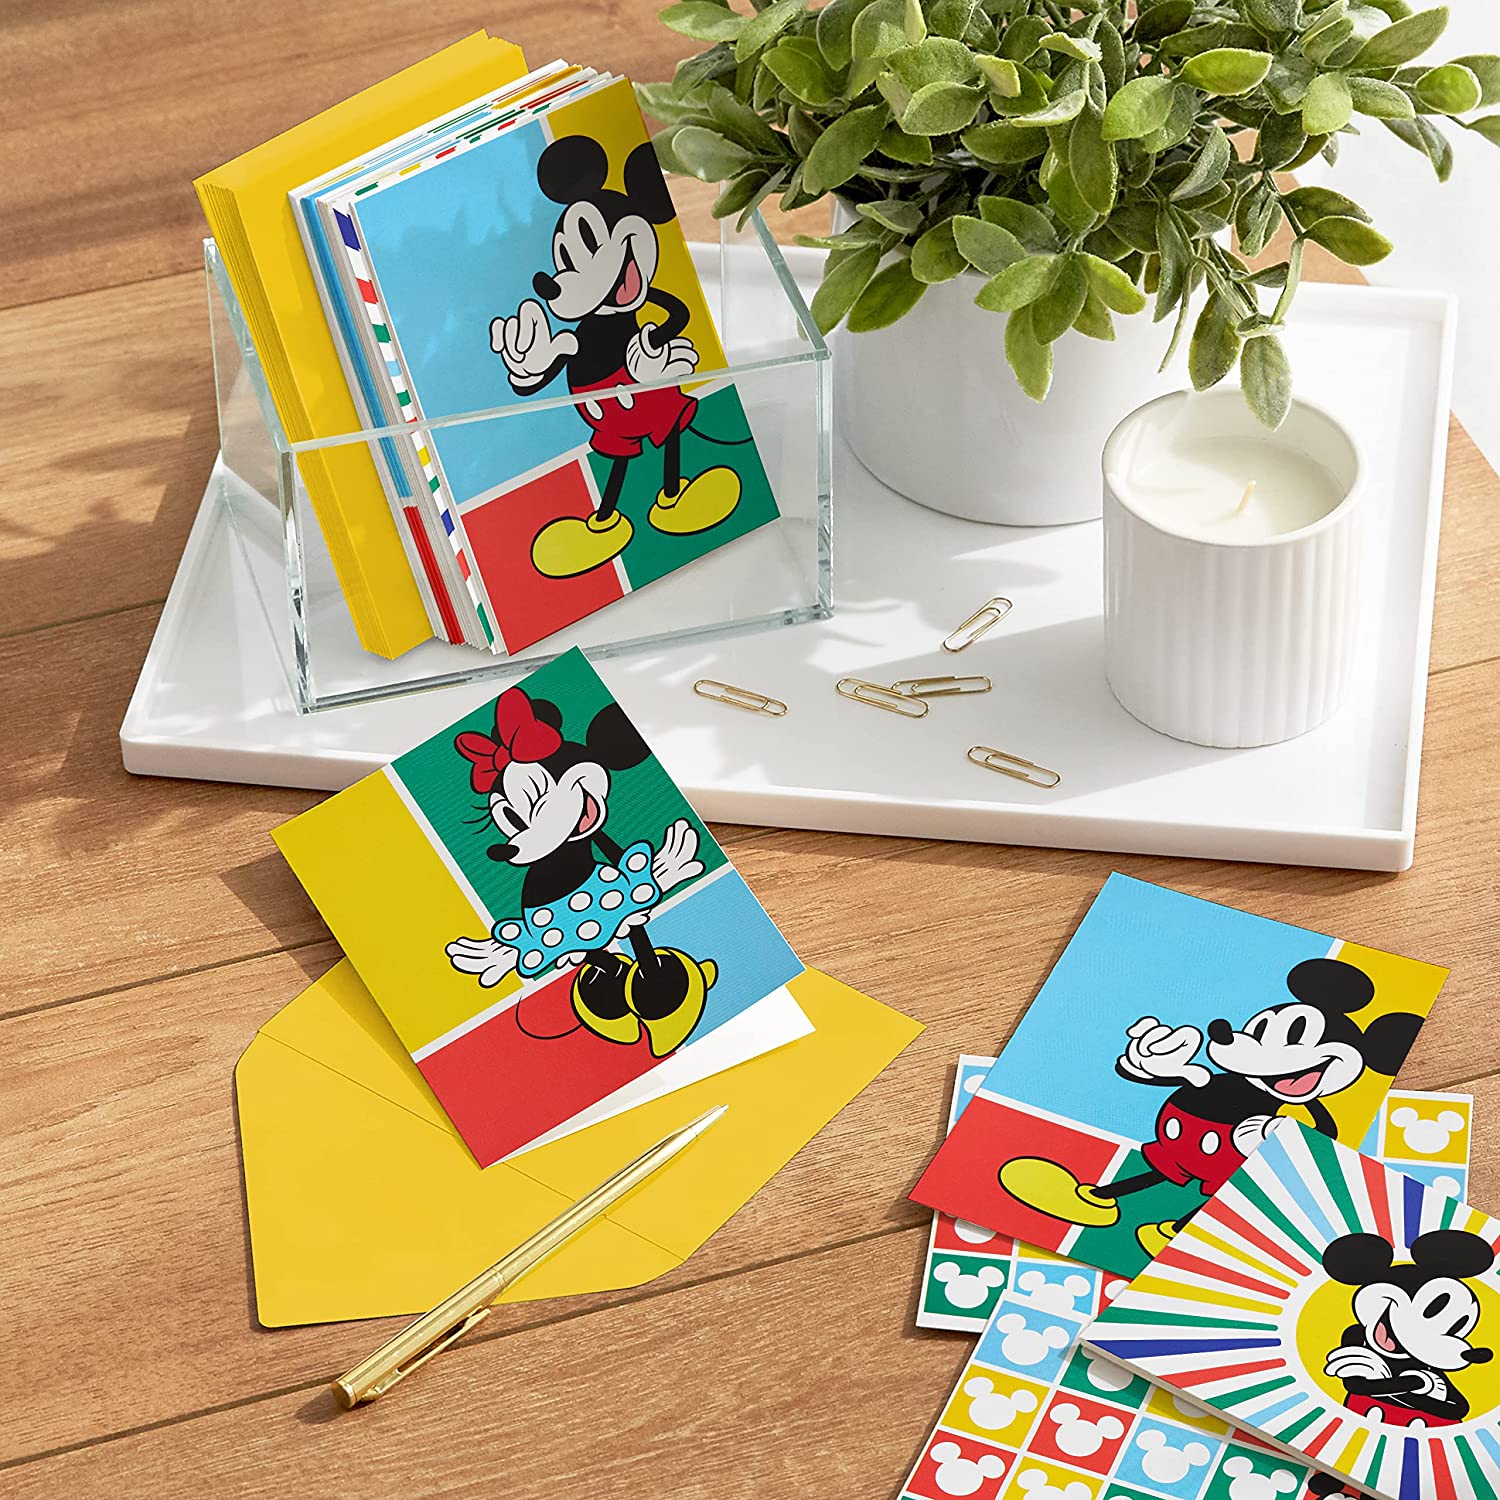 12-Count Hallmark Disney All Occasion Cards w/ Envelopes (Vintage Mickey Mouse + Minnie Mouse) $6.99 ($0.58/each) via Amazon